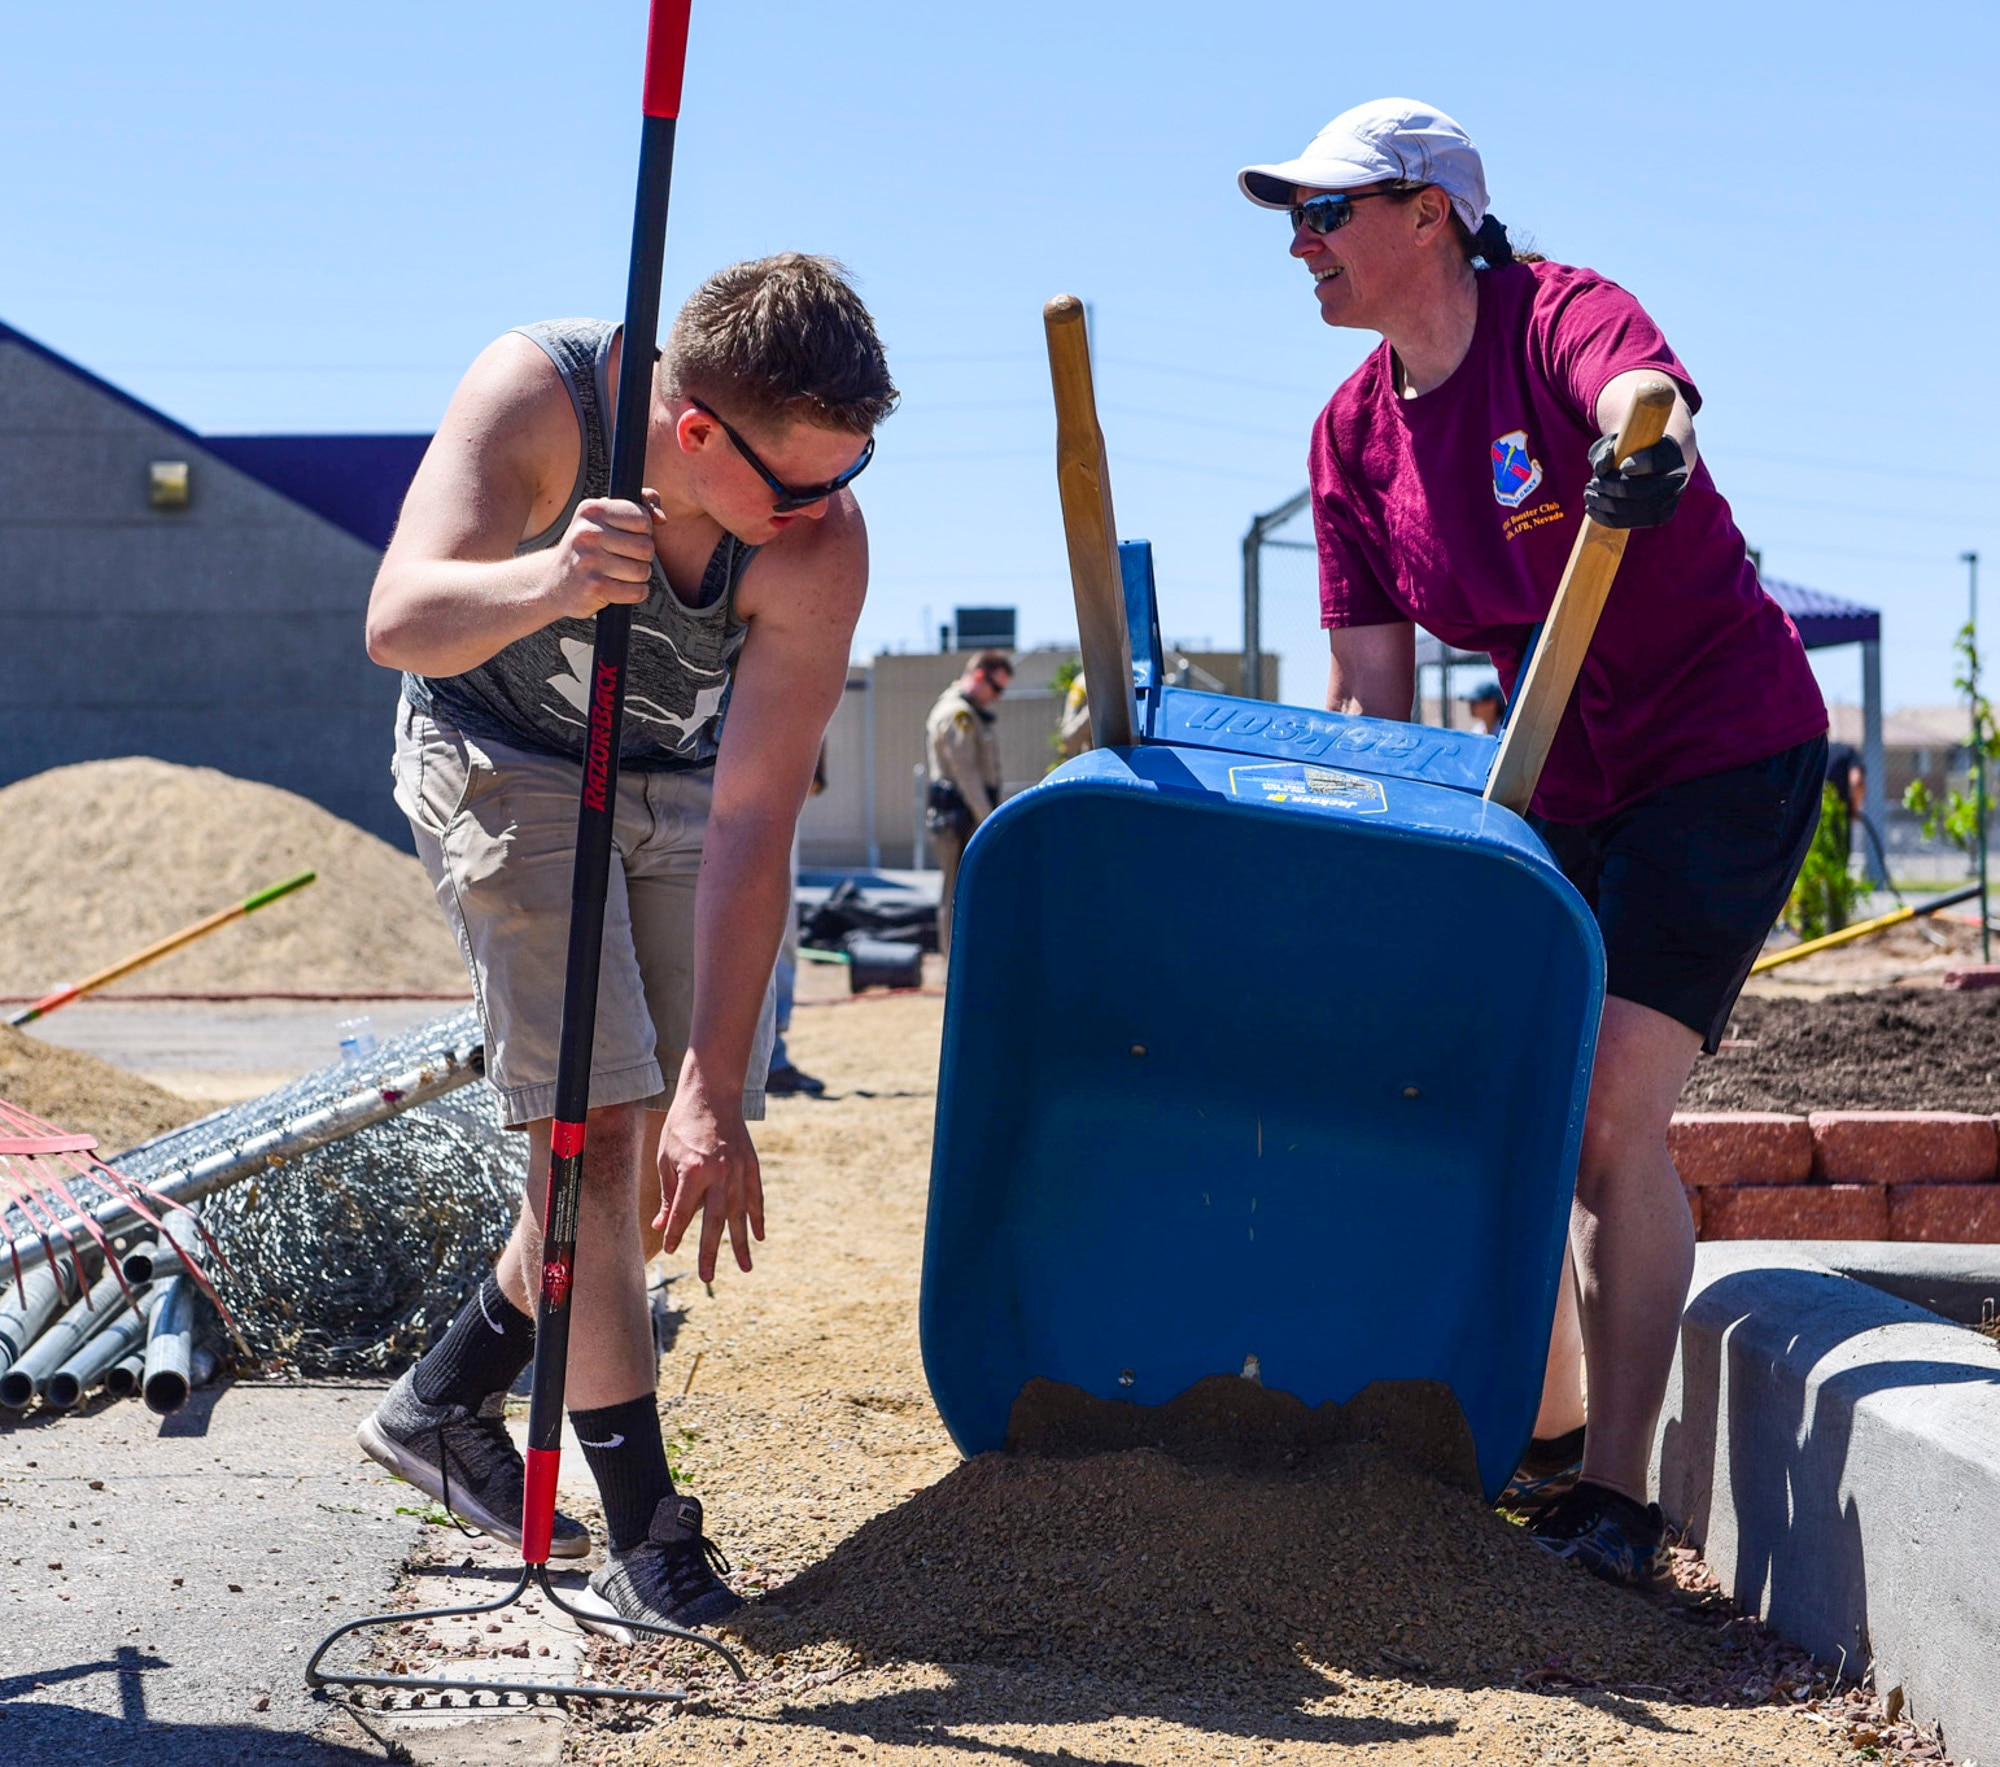 Col. Virginia Garner, 99th Medical Group commander, empties dirt from a wheelbarrow while Airman Logan Gaines, 99th Medical Group mental health technician, prepares to spread the dirt at a community garden between J.E. Manch and Zel & Mary elementary schools, May 12, 2017. Airmen from Nellis Air Force Base volunteered with community members to build a garden that will be used by the elementary schools for outdoor and environmental education. (U.S. Air Force photo by Airman 1st Class Andrew D. Sarver/Released)